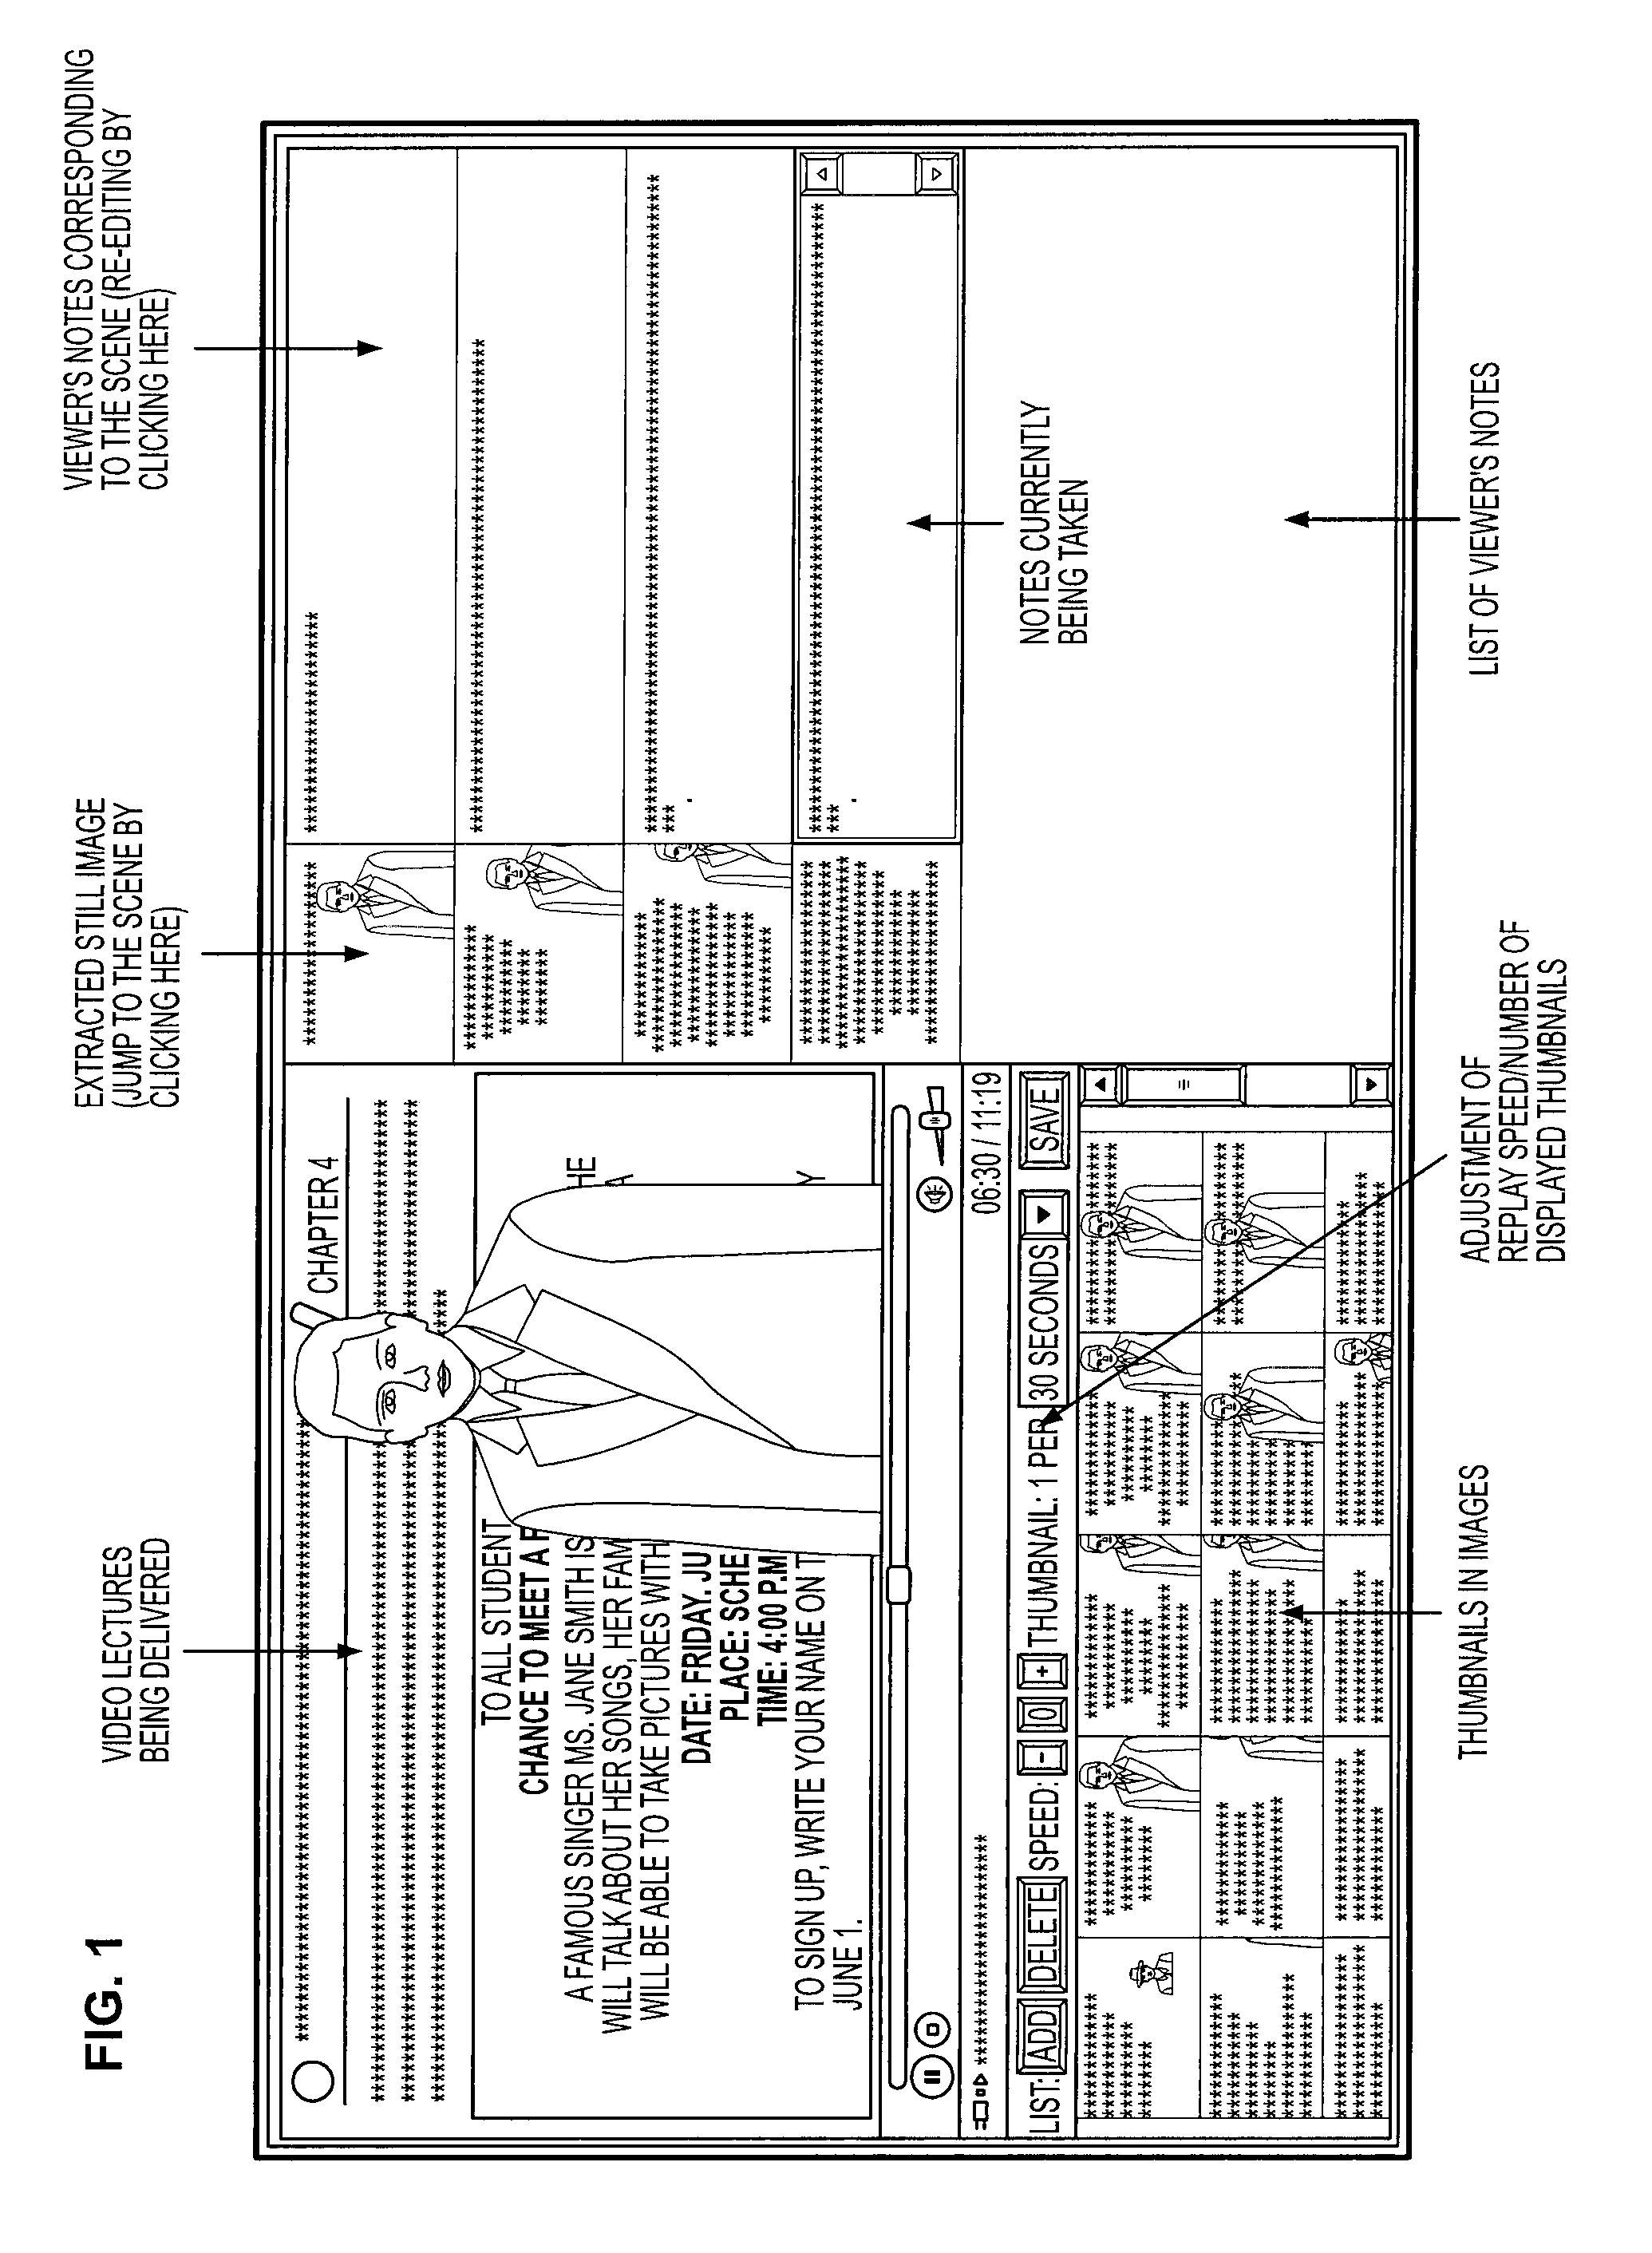 Video playing system and a controlling method thereof